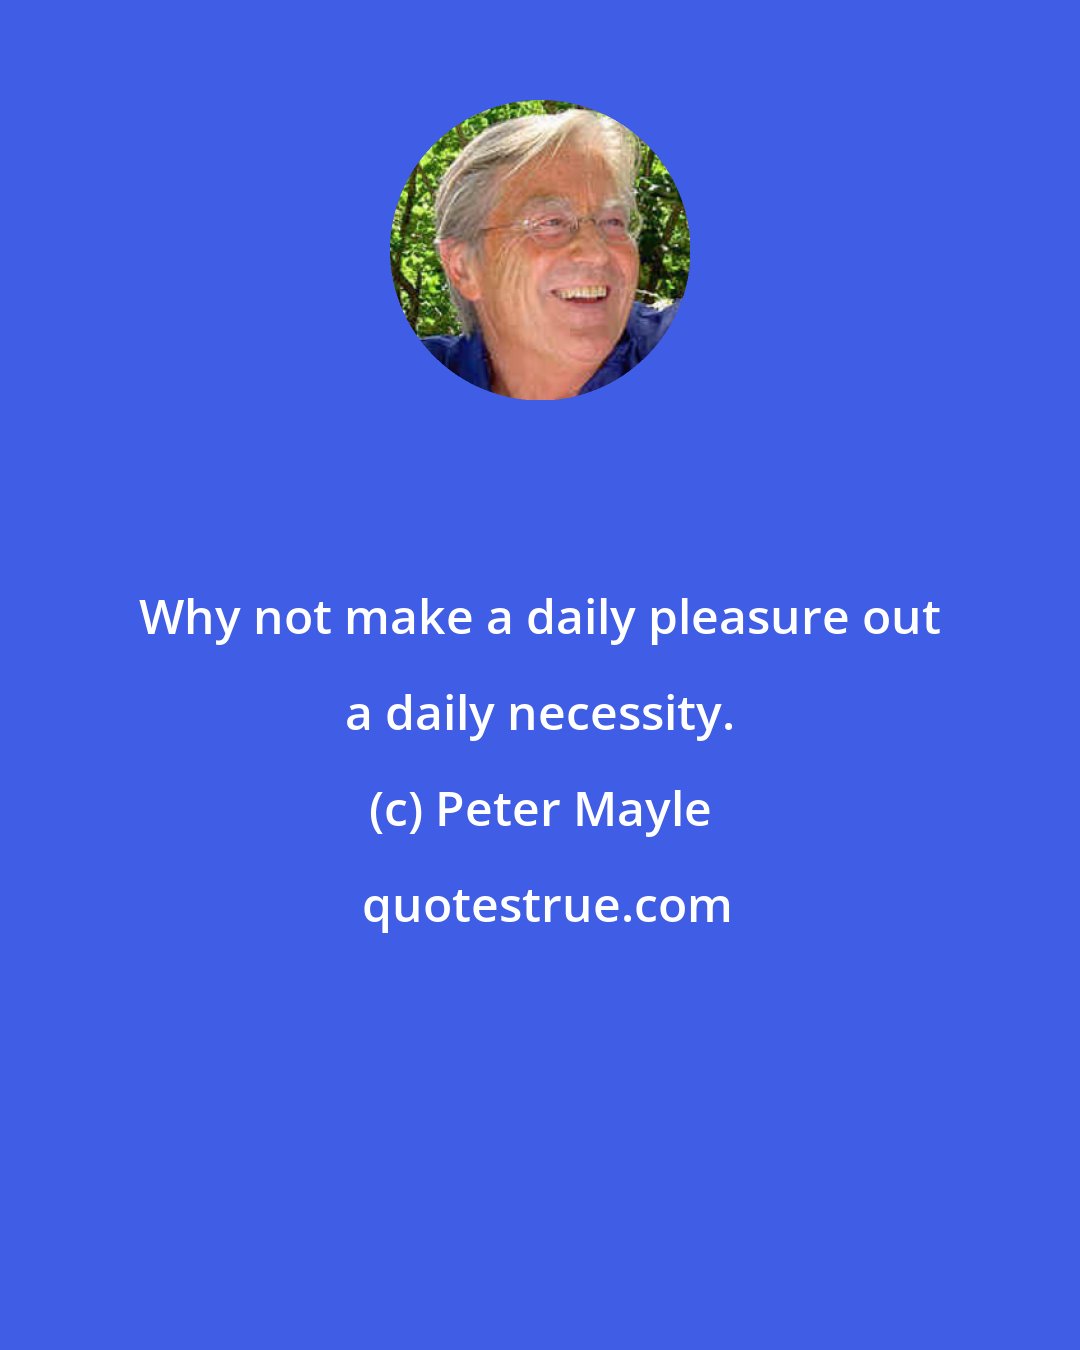 Peter Mayle: Why not make a daily pleasure out a daily necessity.